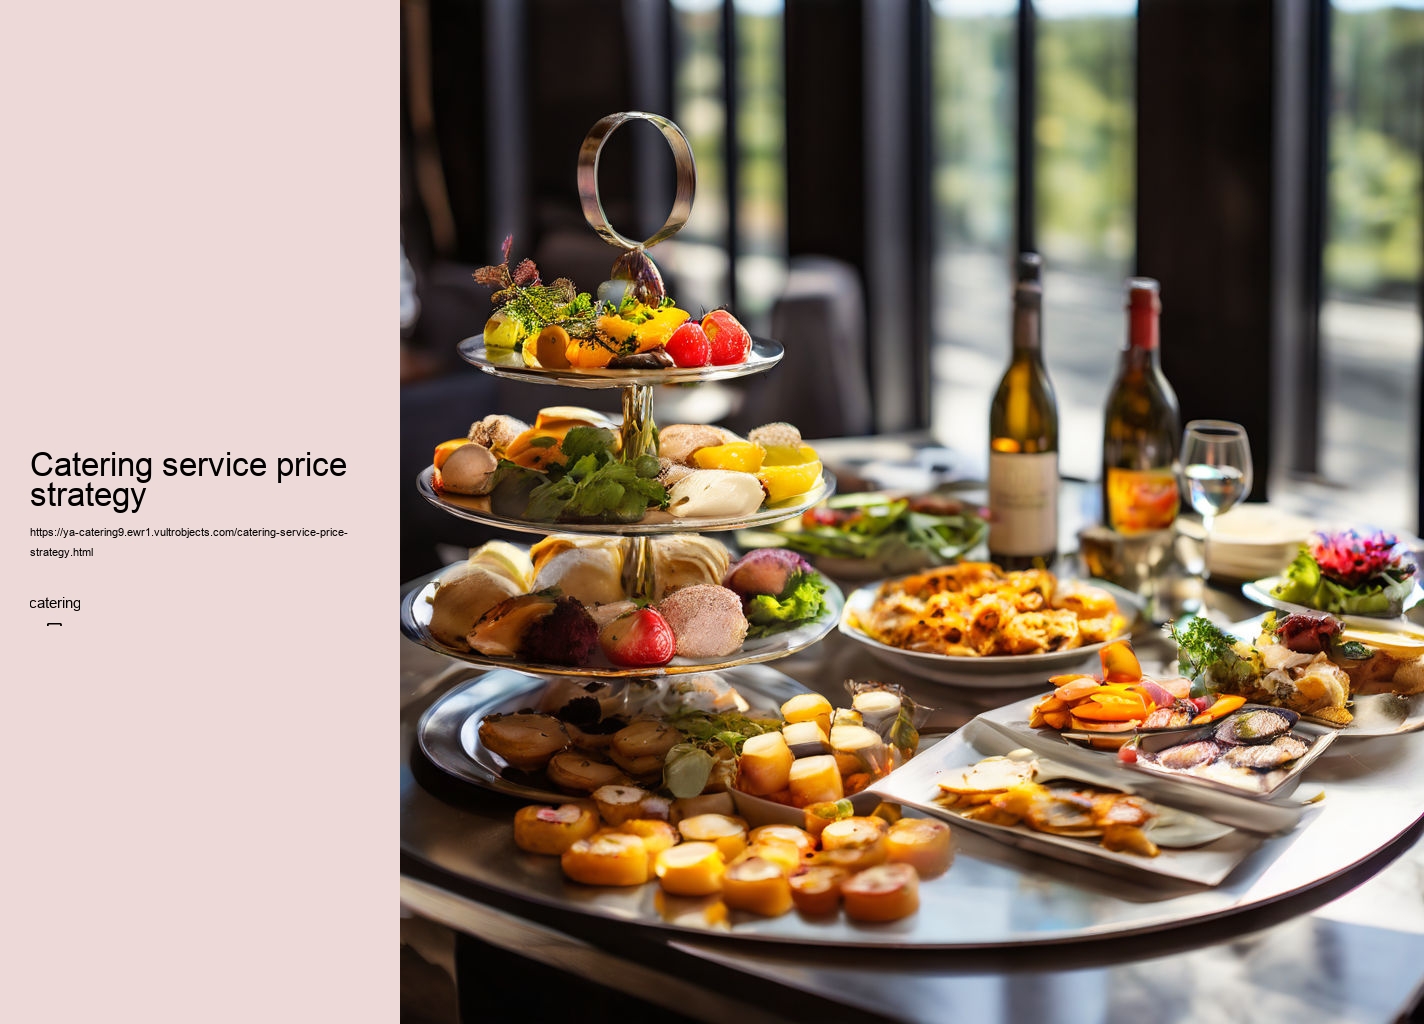 Catering service price strategy